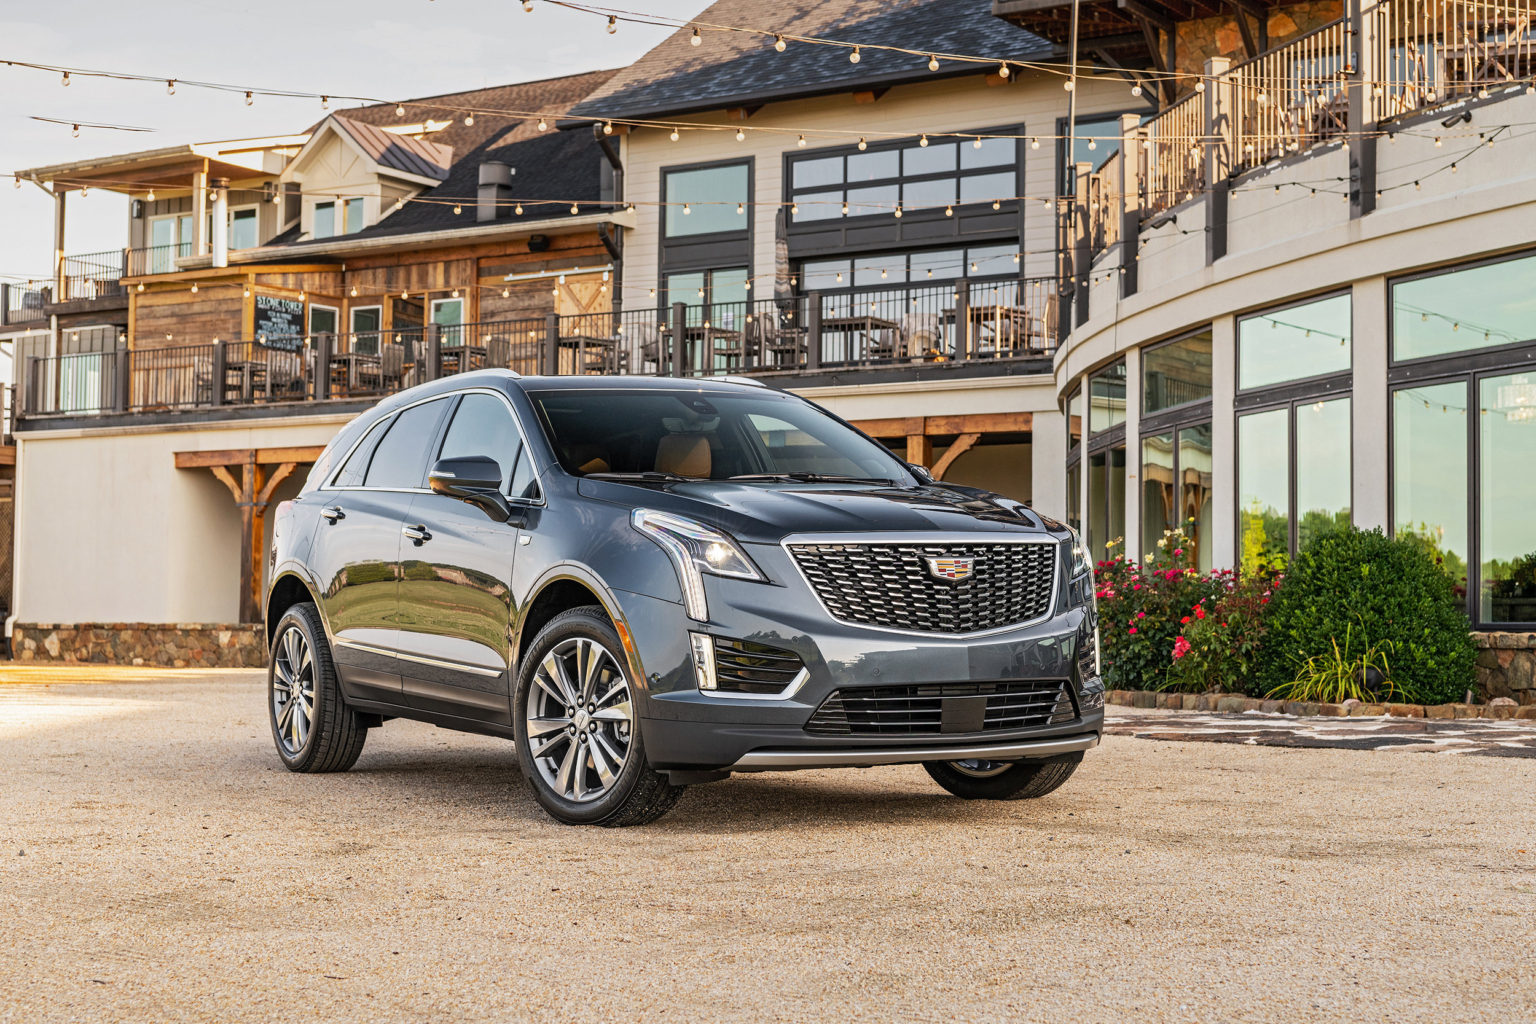 The Cadillac XT5 was recency updated to become a finer-looking stallion. (2020 XT5 shown.)